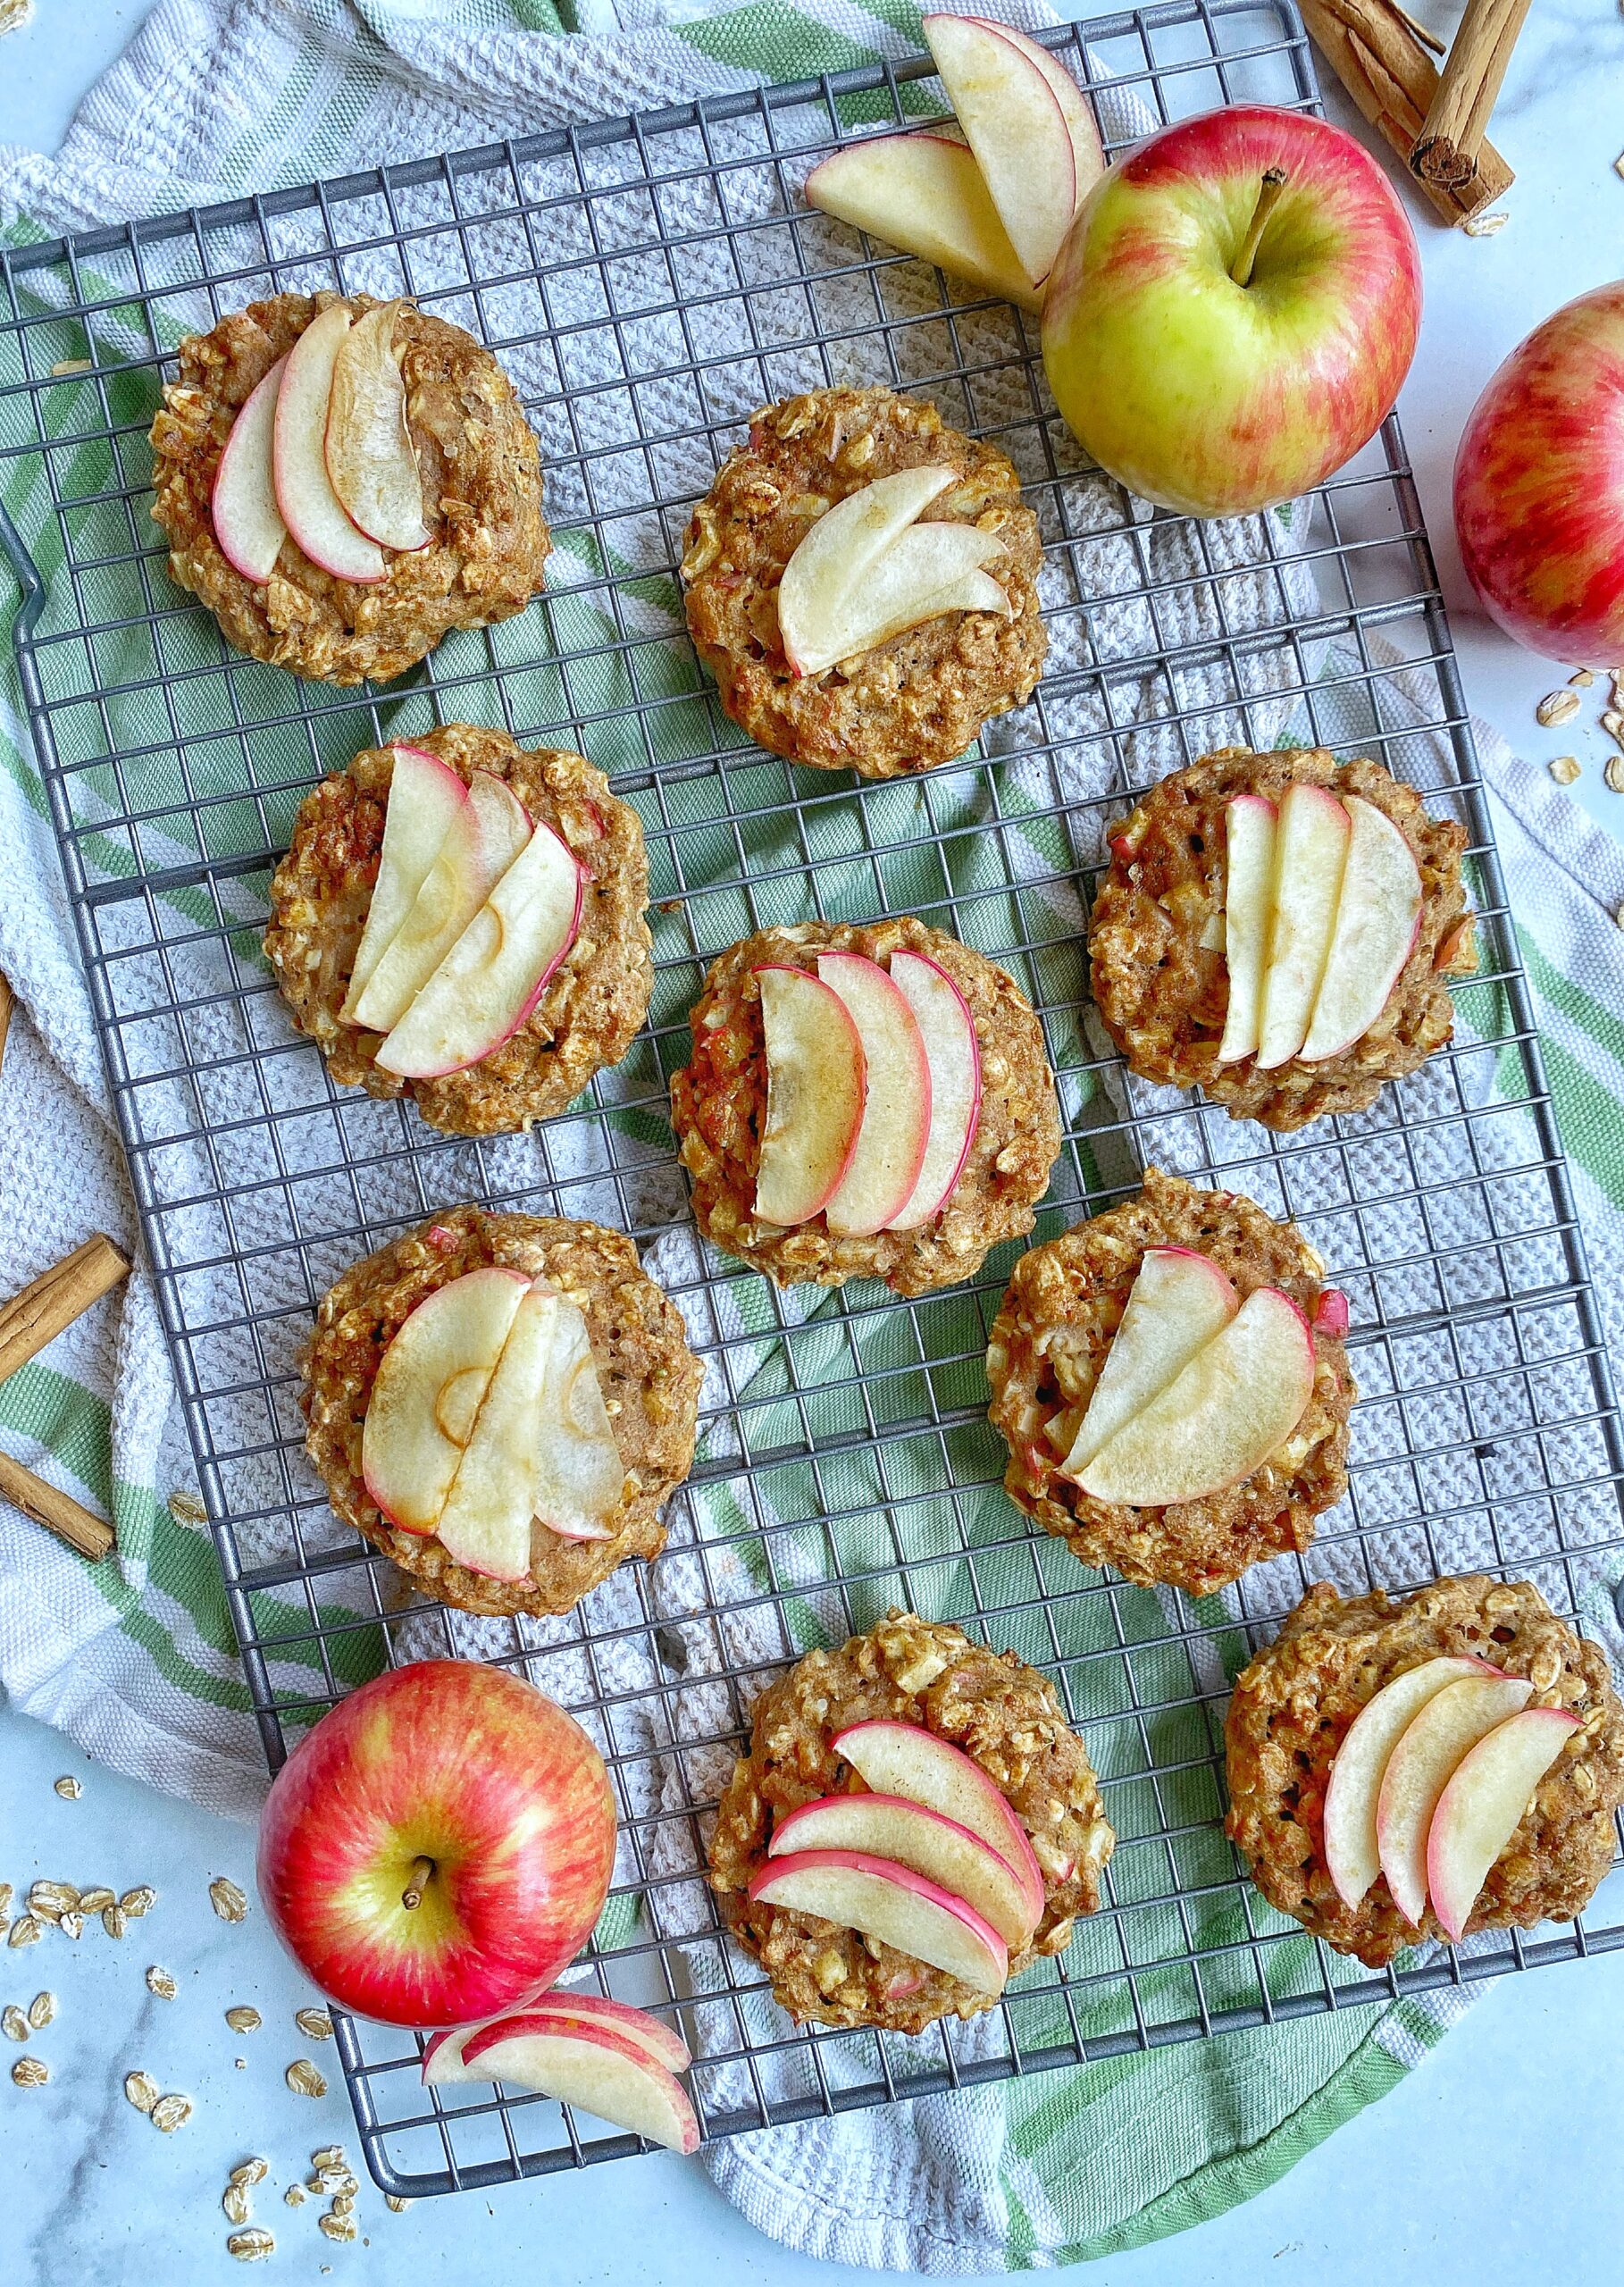 Breakfast cookies topped with apple slices sitting on top of a wire rack on top of a kitchen towel. Whole apples, apple slices, cinnamon sticks, and spilled oats are surrounding the breakfast cookies.